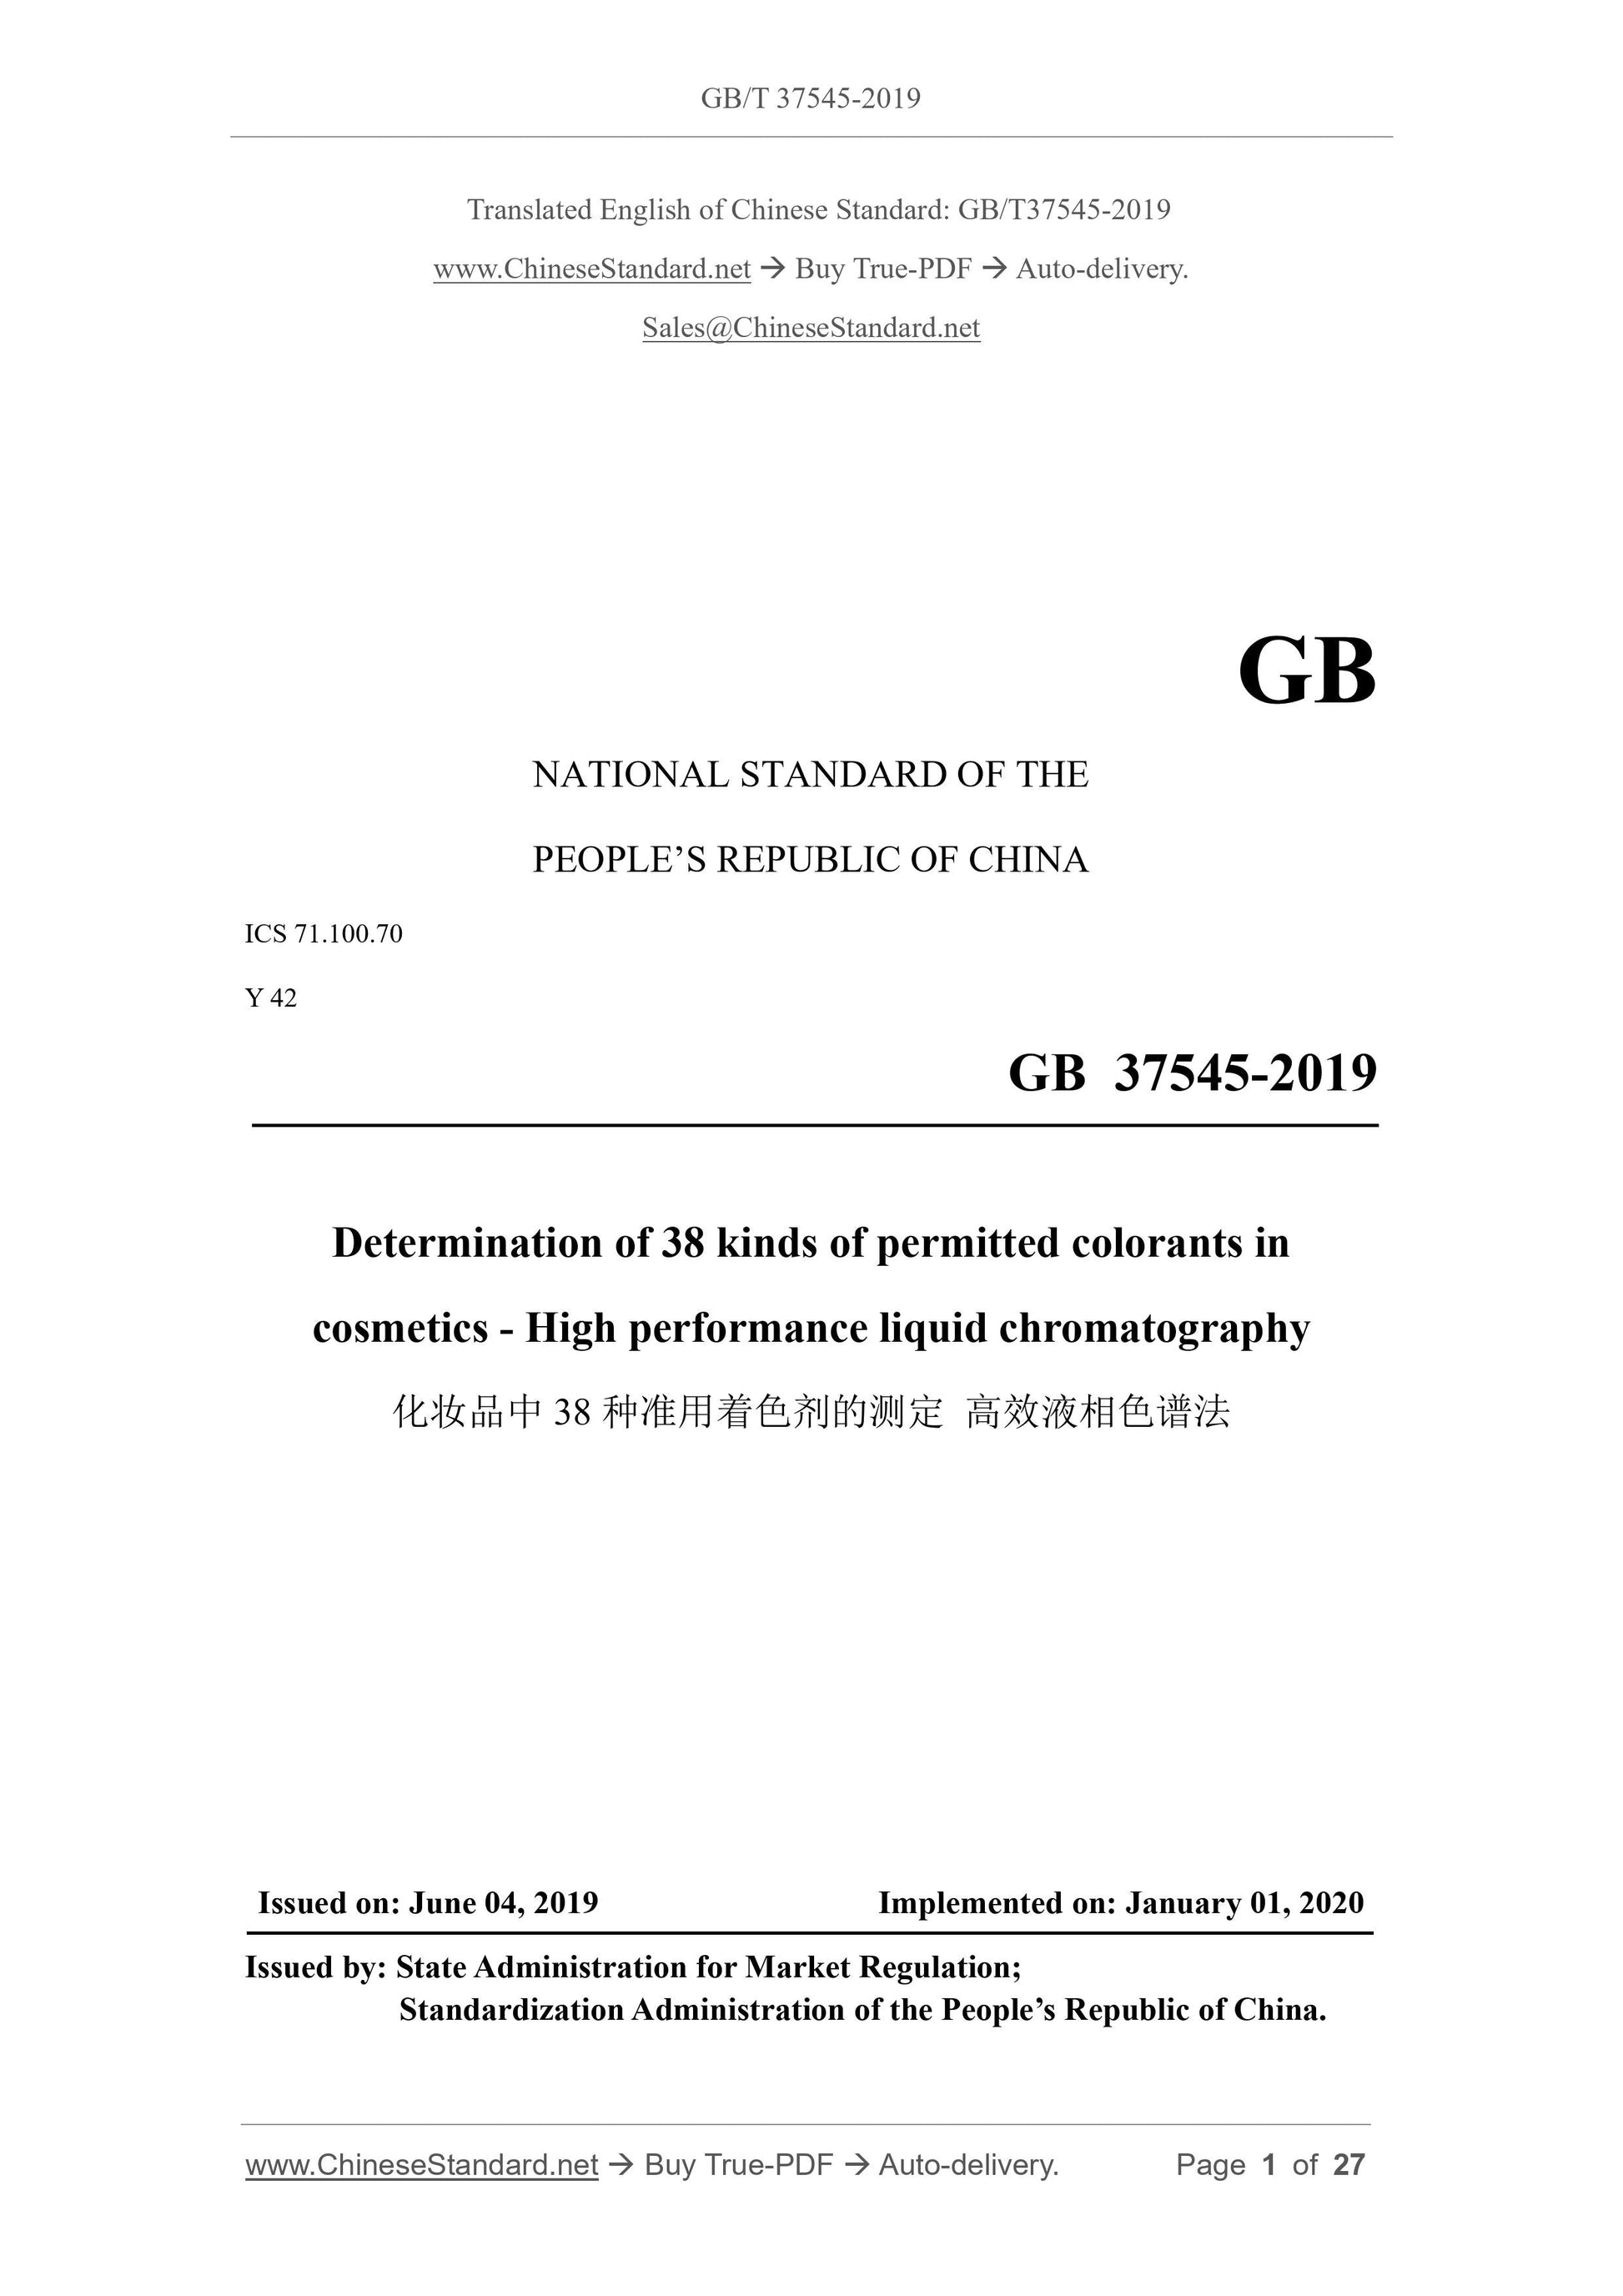 GB/T 37545-2019 Page 1